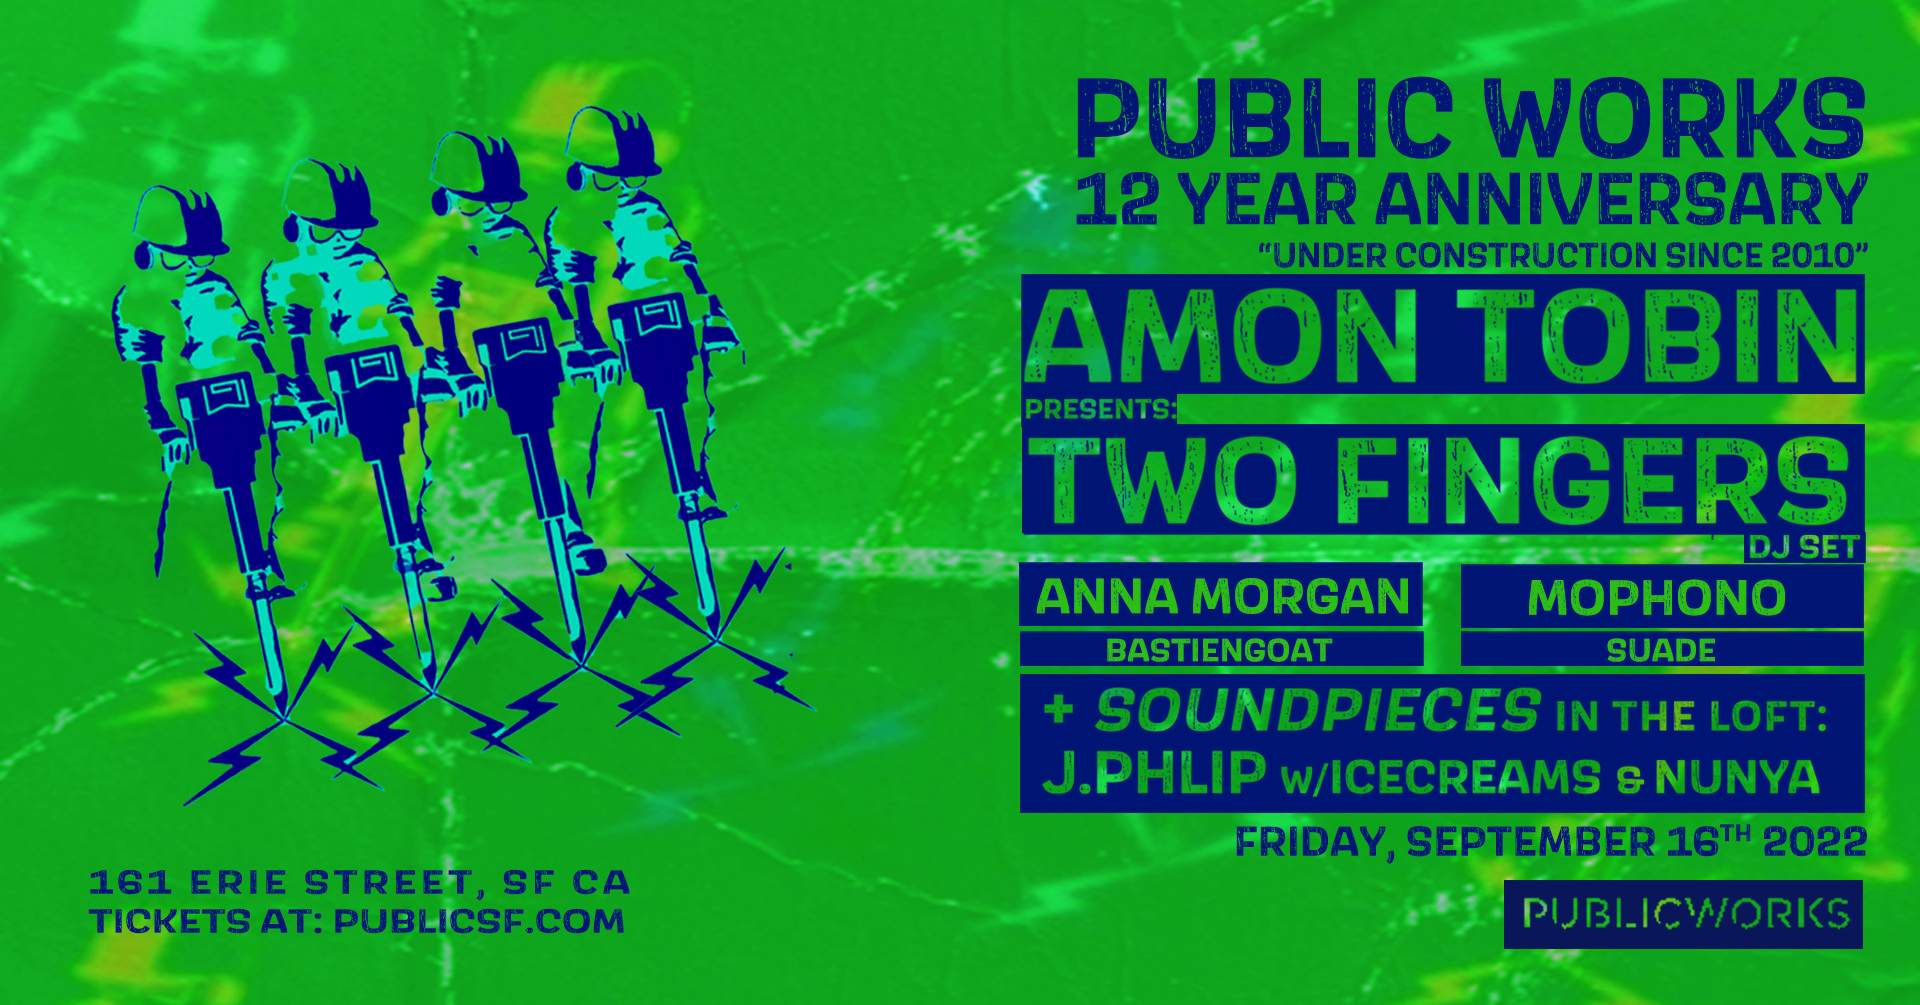 Public Works 12-Year Anniversary with Amon Tobin presents Two Fingers DJ Set - Página frontal